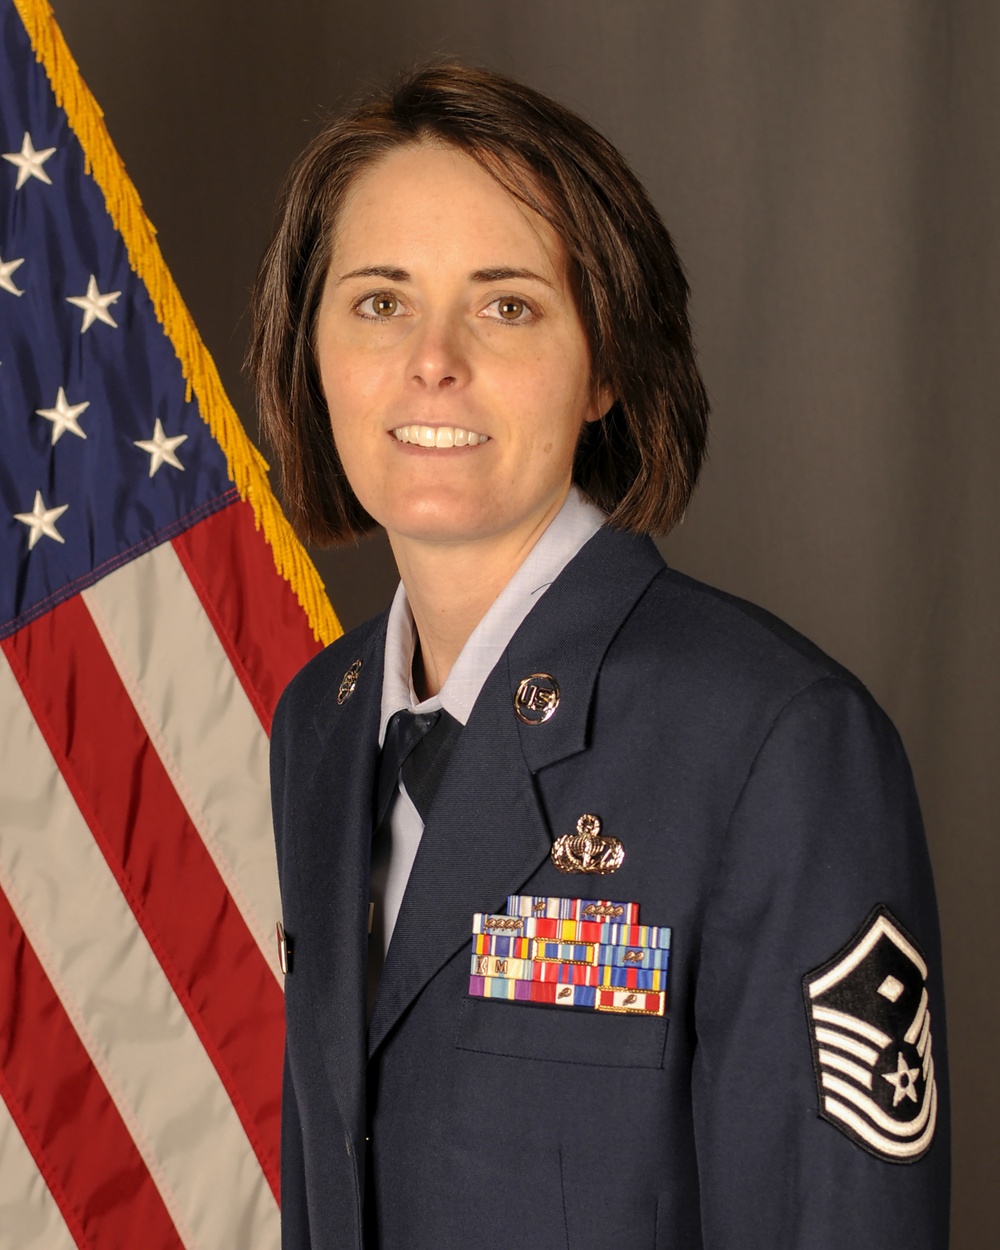 SOUTH DAKOTA AIR NATIONAL GUARD RECOGNIZES EXCELLENCE WITHIN UNIT